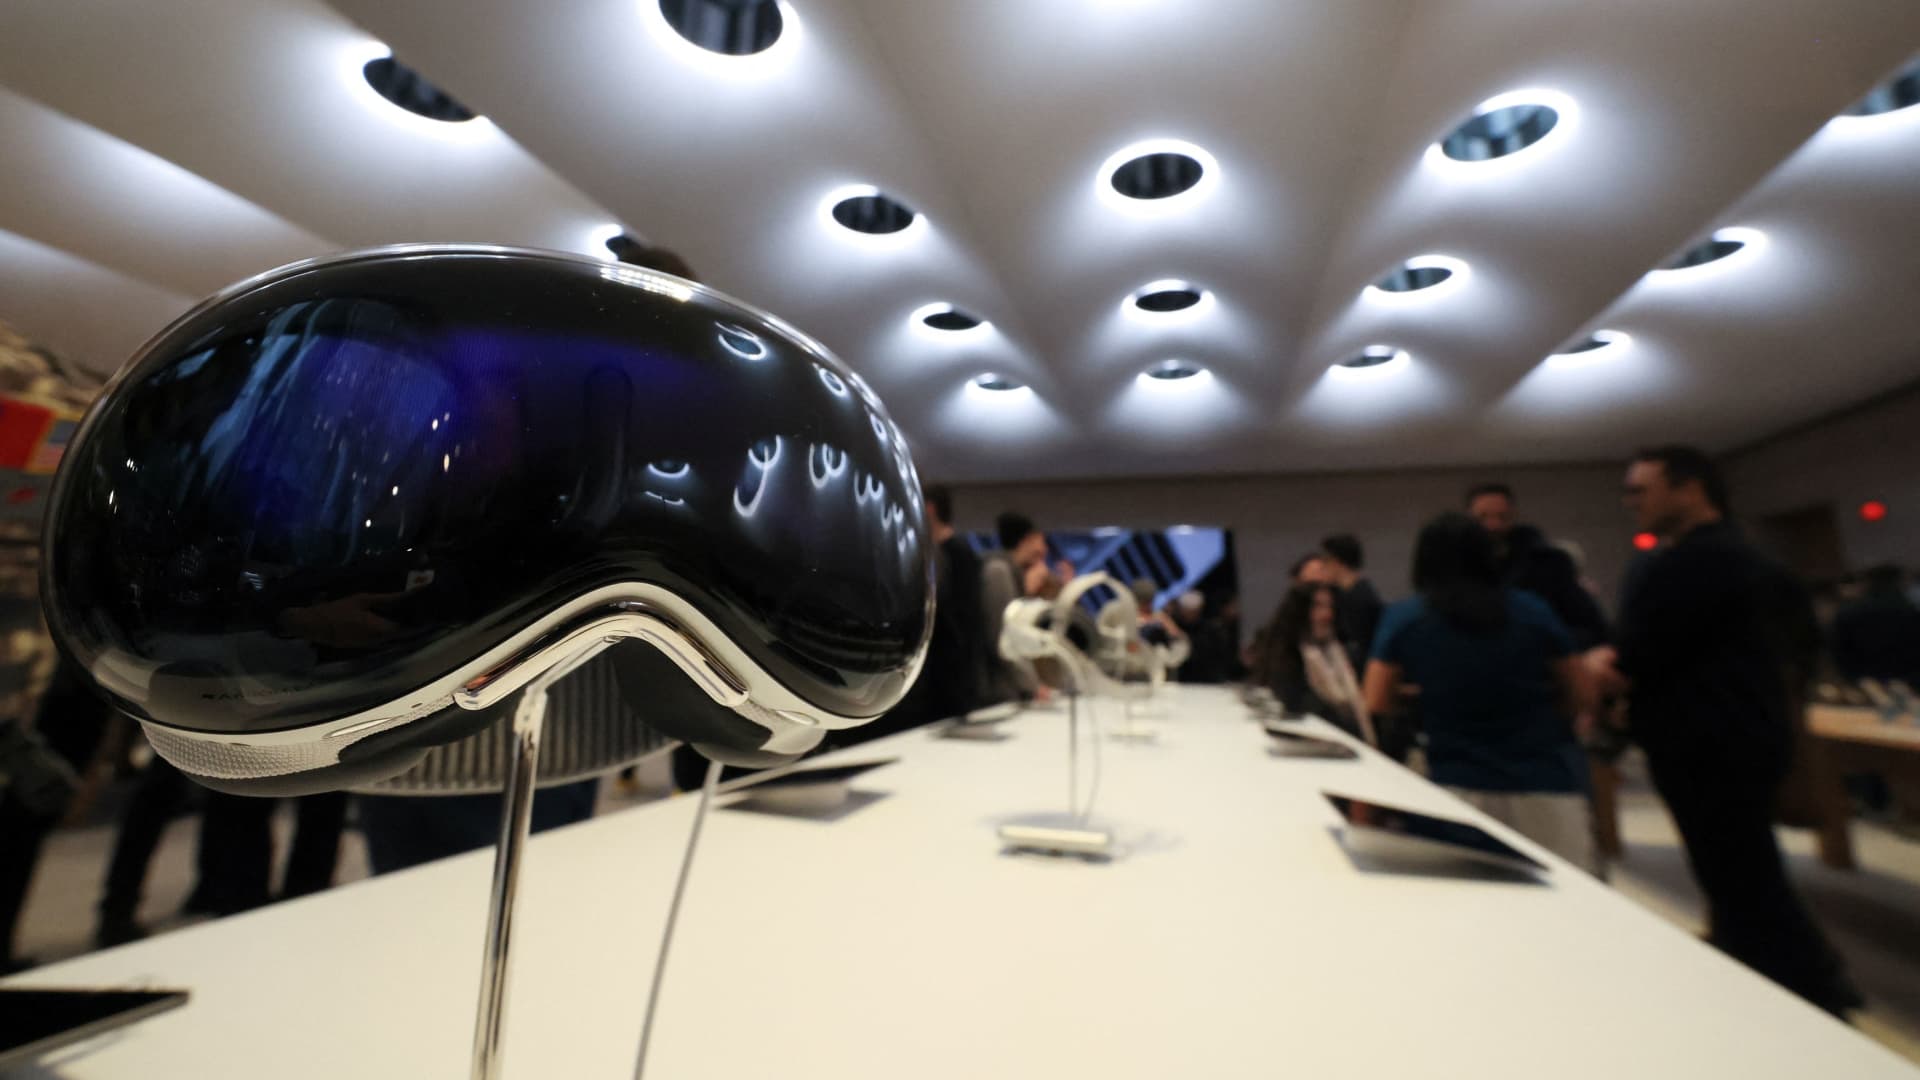 Apple's Vision Pro headset is displayed at the Apple Fifth Avenue store in Manhattan in New York City, U.S., February 2, 2024. REUTERS/Brendan McDermid